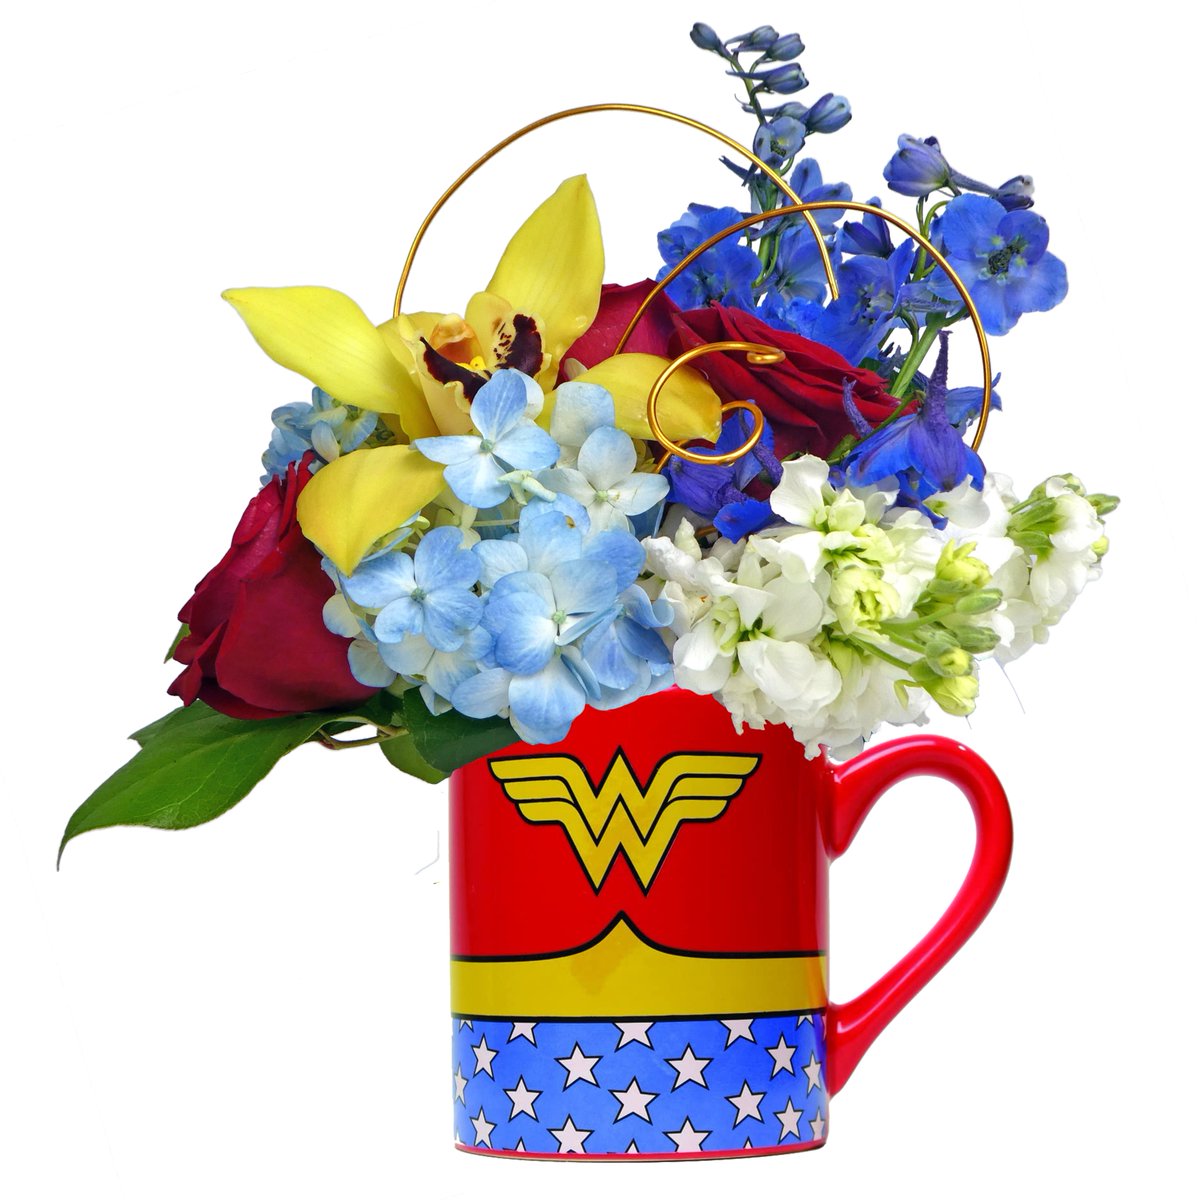 It's International Women's Day! Recognize the women in your life for the superheroes that they are. 🦸‍♀️ Order online today: tinyurl.com/45v752wc Or call 703-281-4141. #internationalwomensday #superheroes #florist